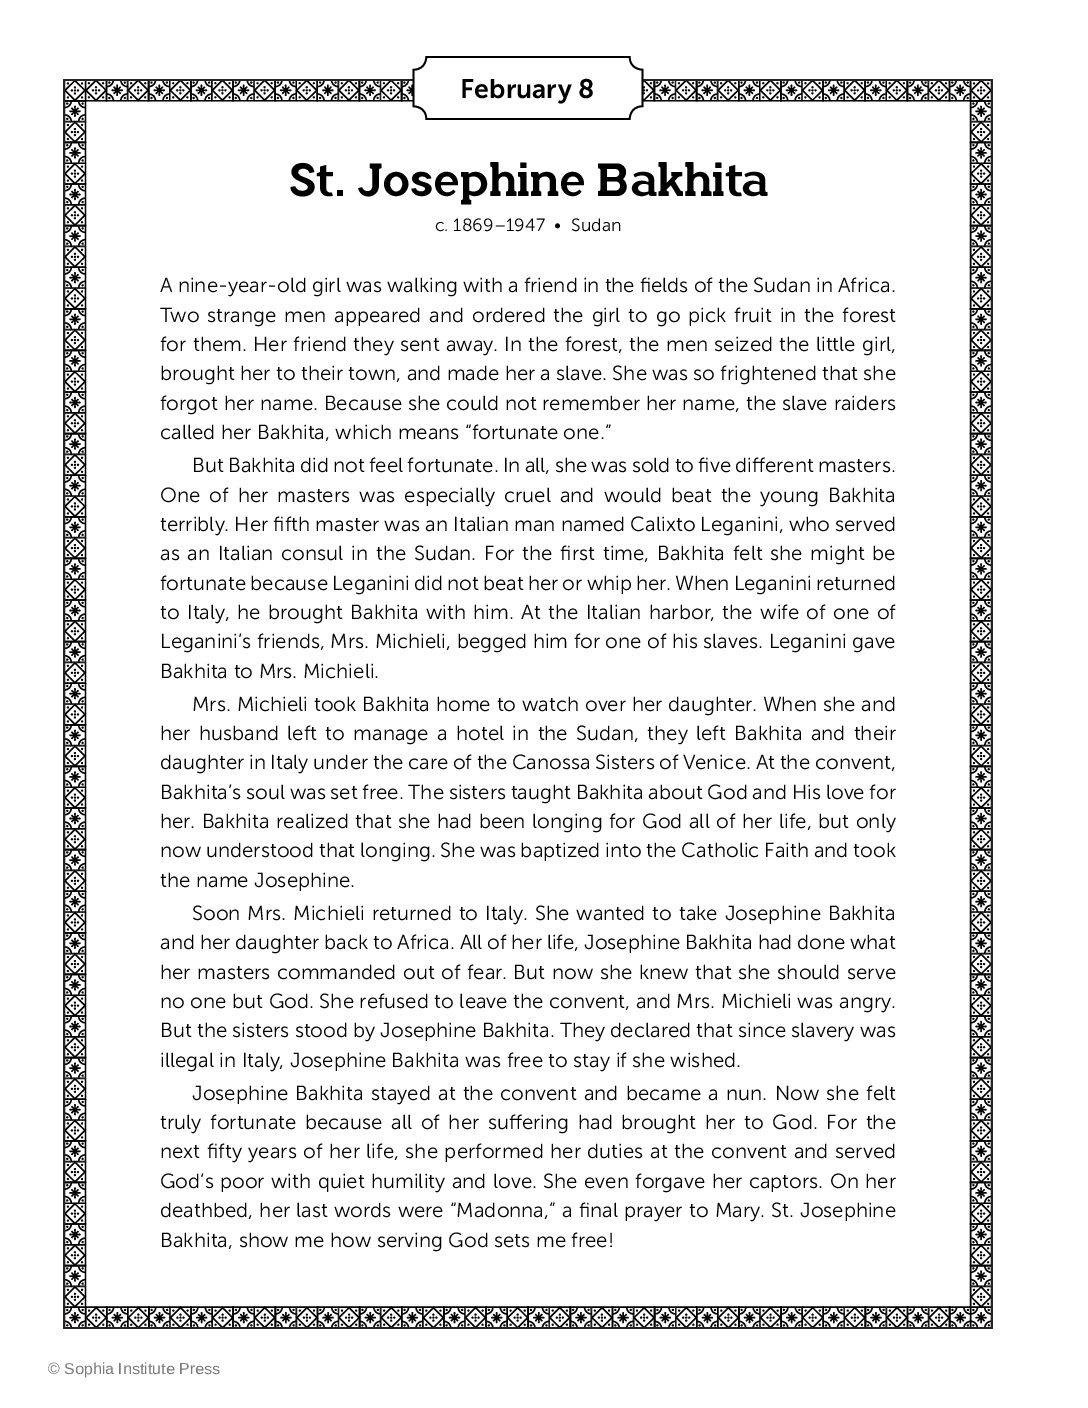 St josephine bakhita story and coloring page